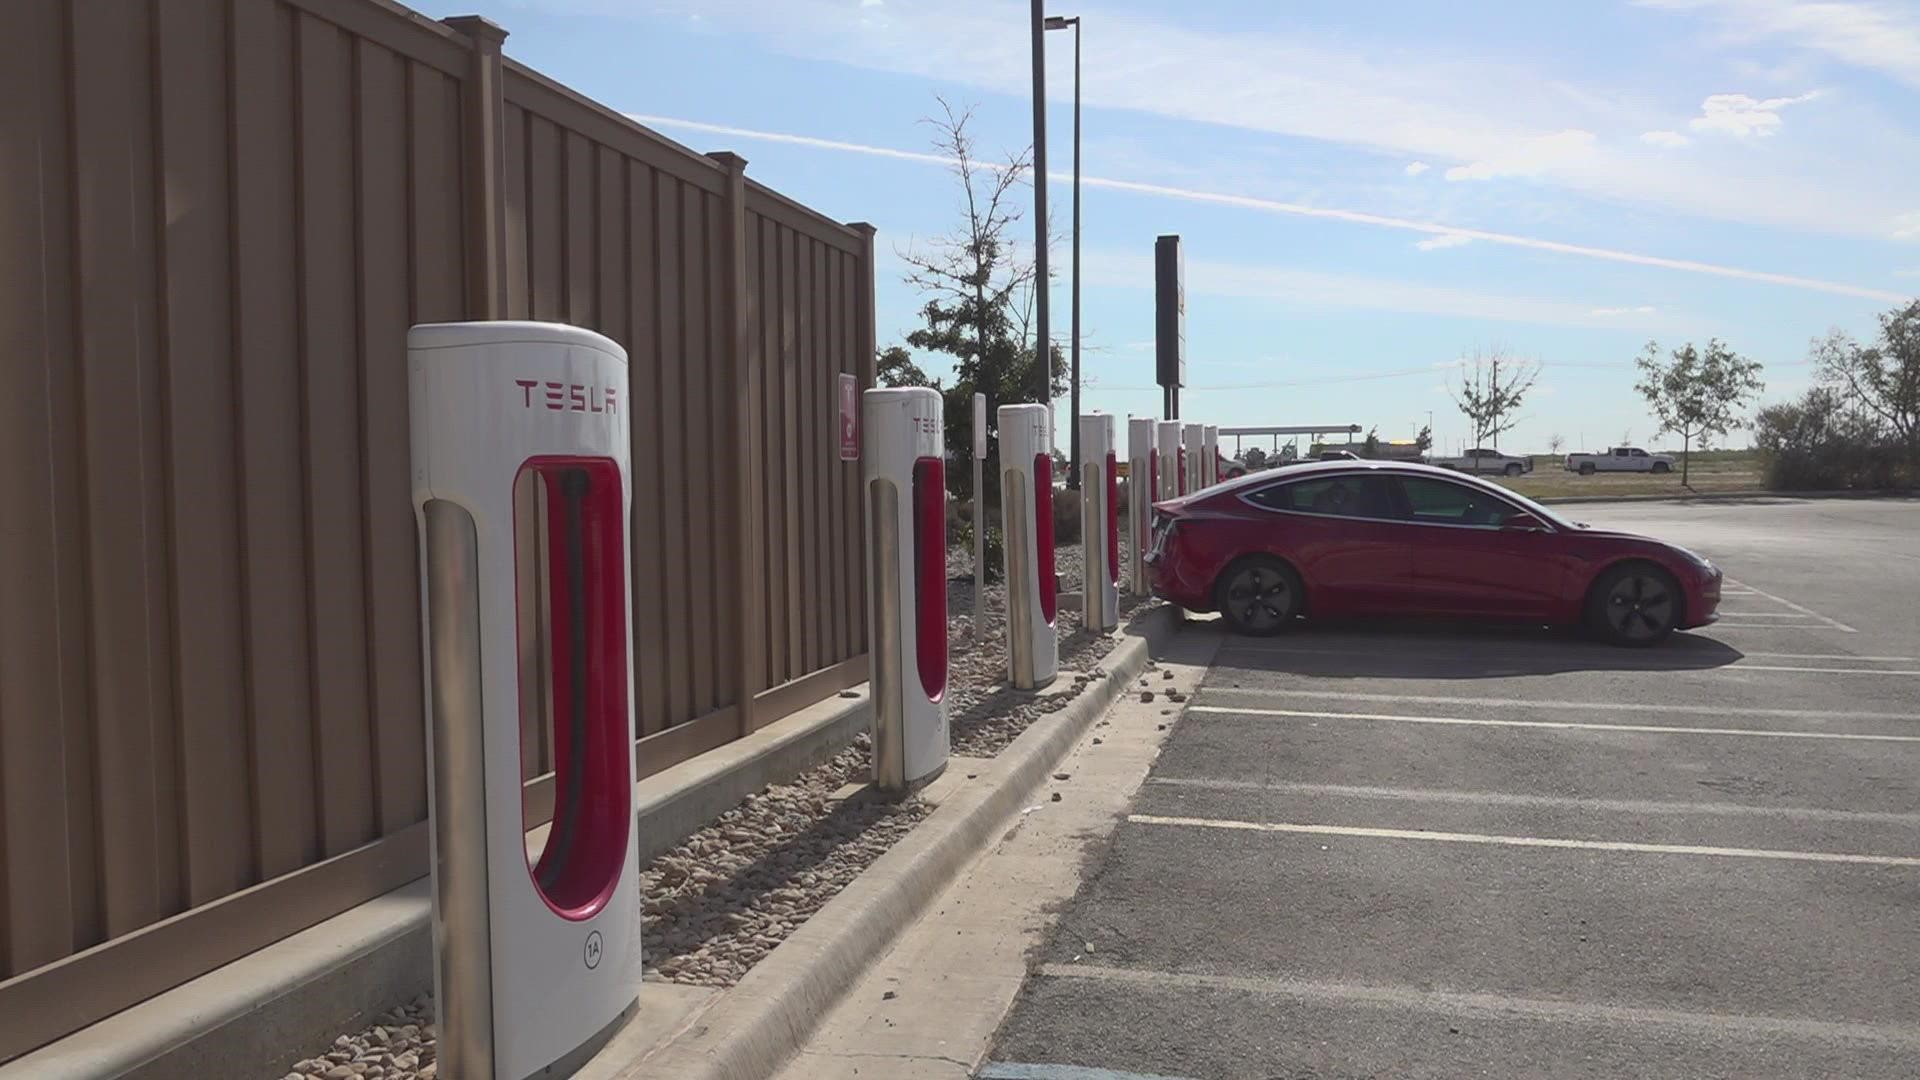 Tesla will provide the funding as it looks to expand further into West Texas with this location set to be just off Interstate 20